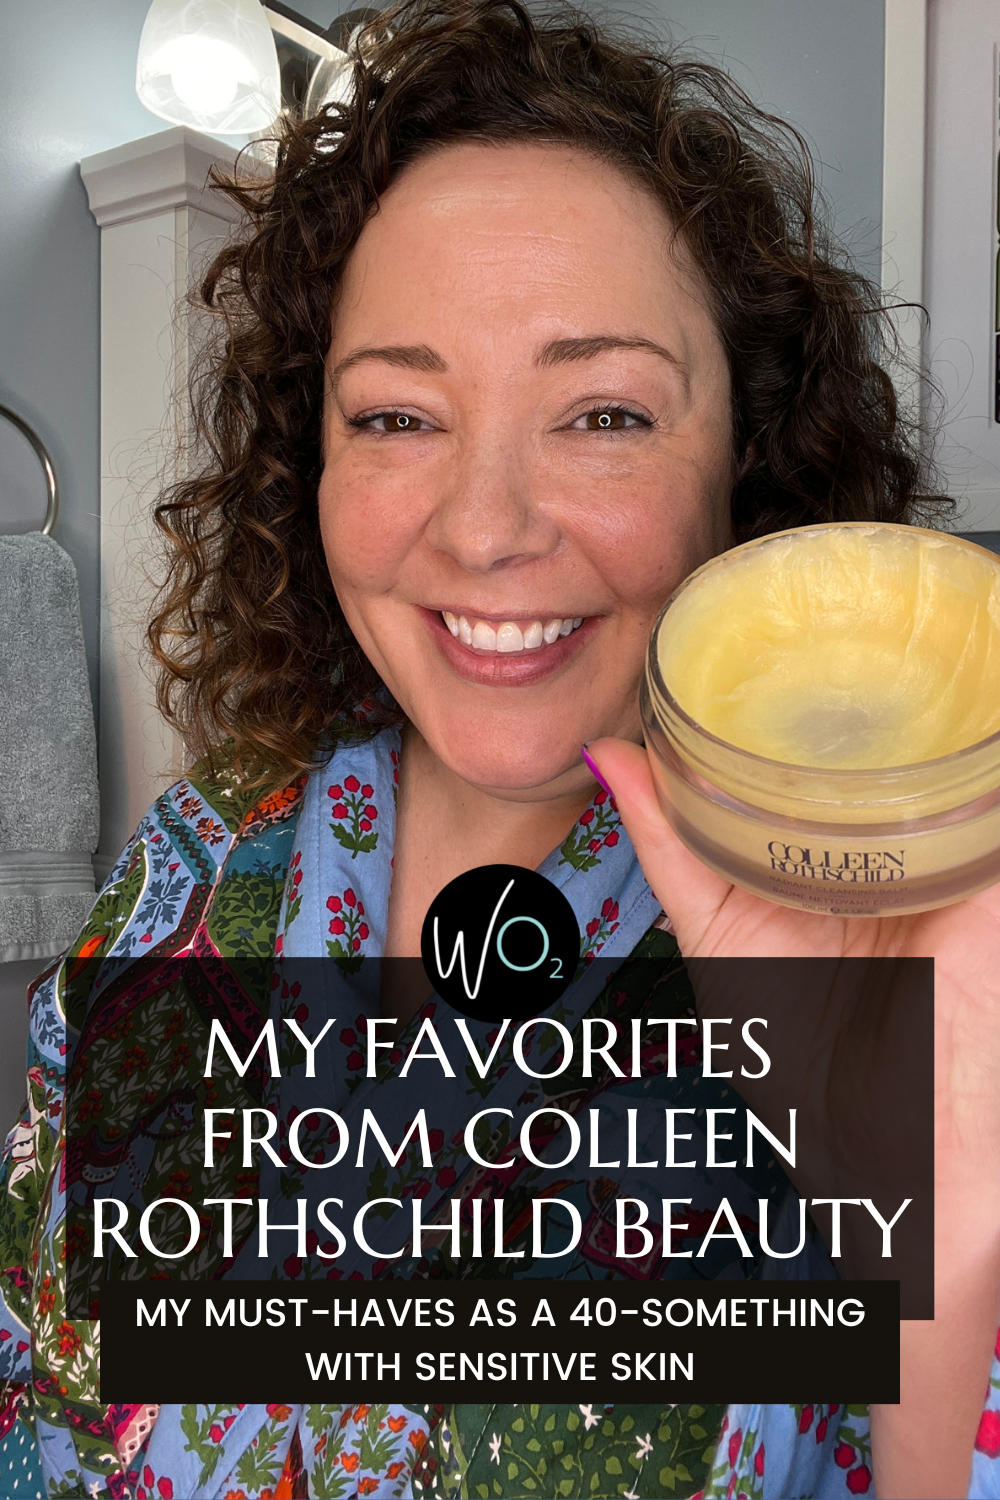 The Best Colleen Rothschild Beauty for my Midlife Skin (and how to get 30% off)